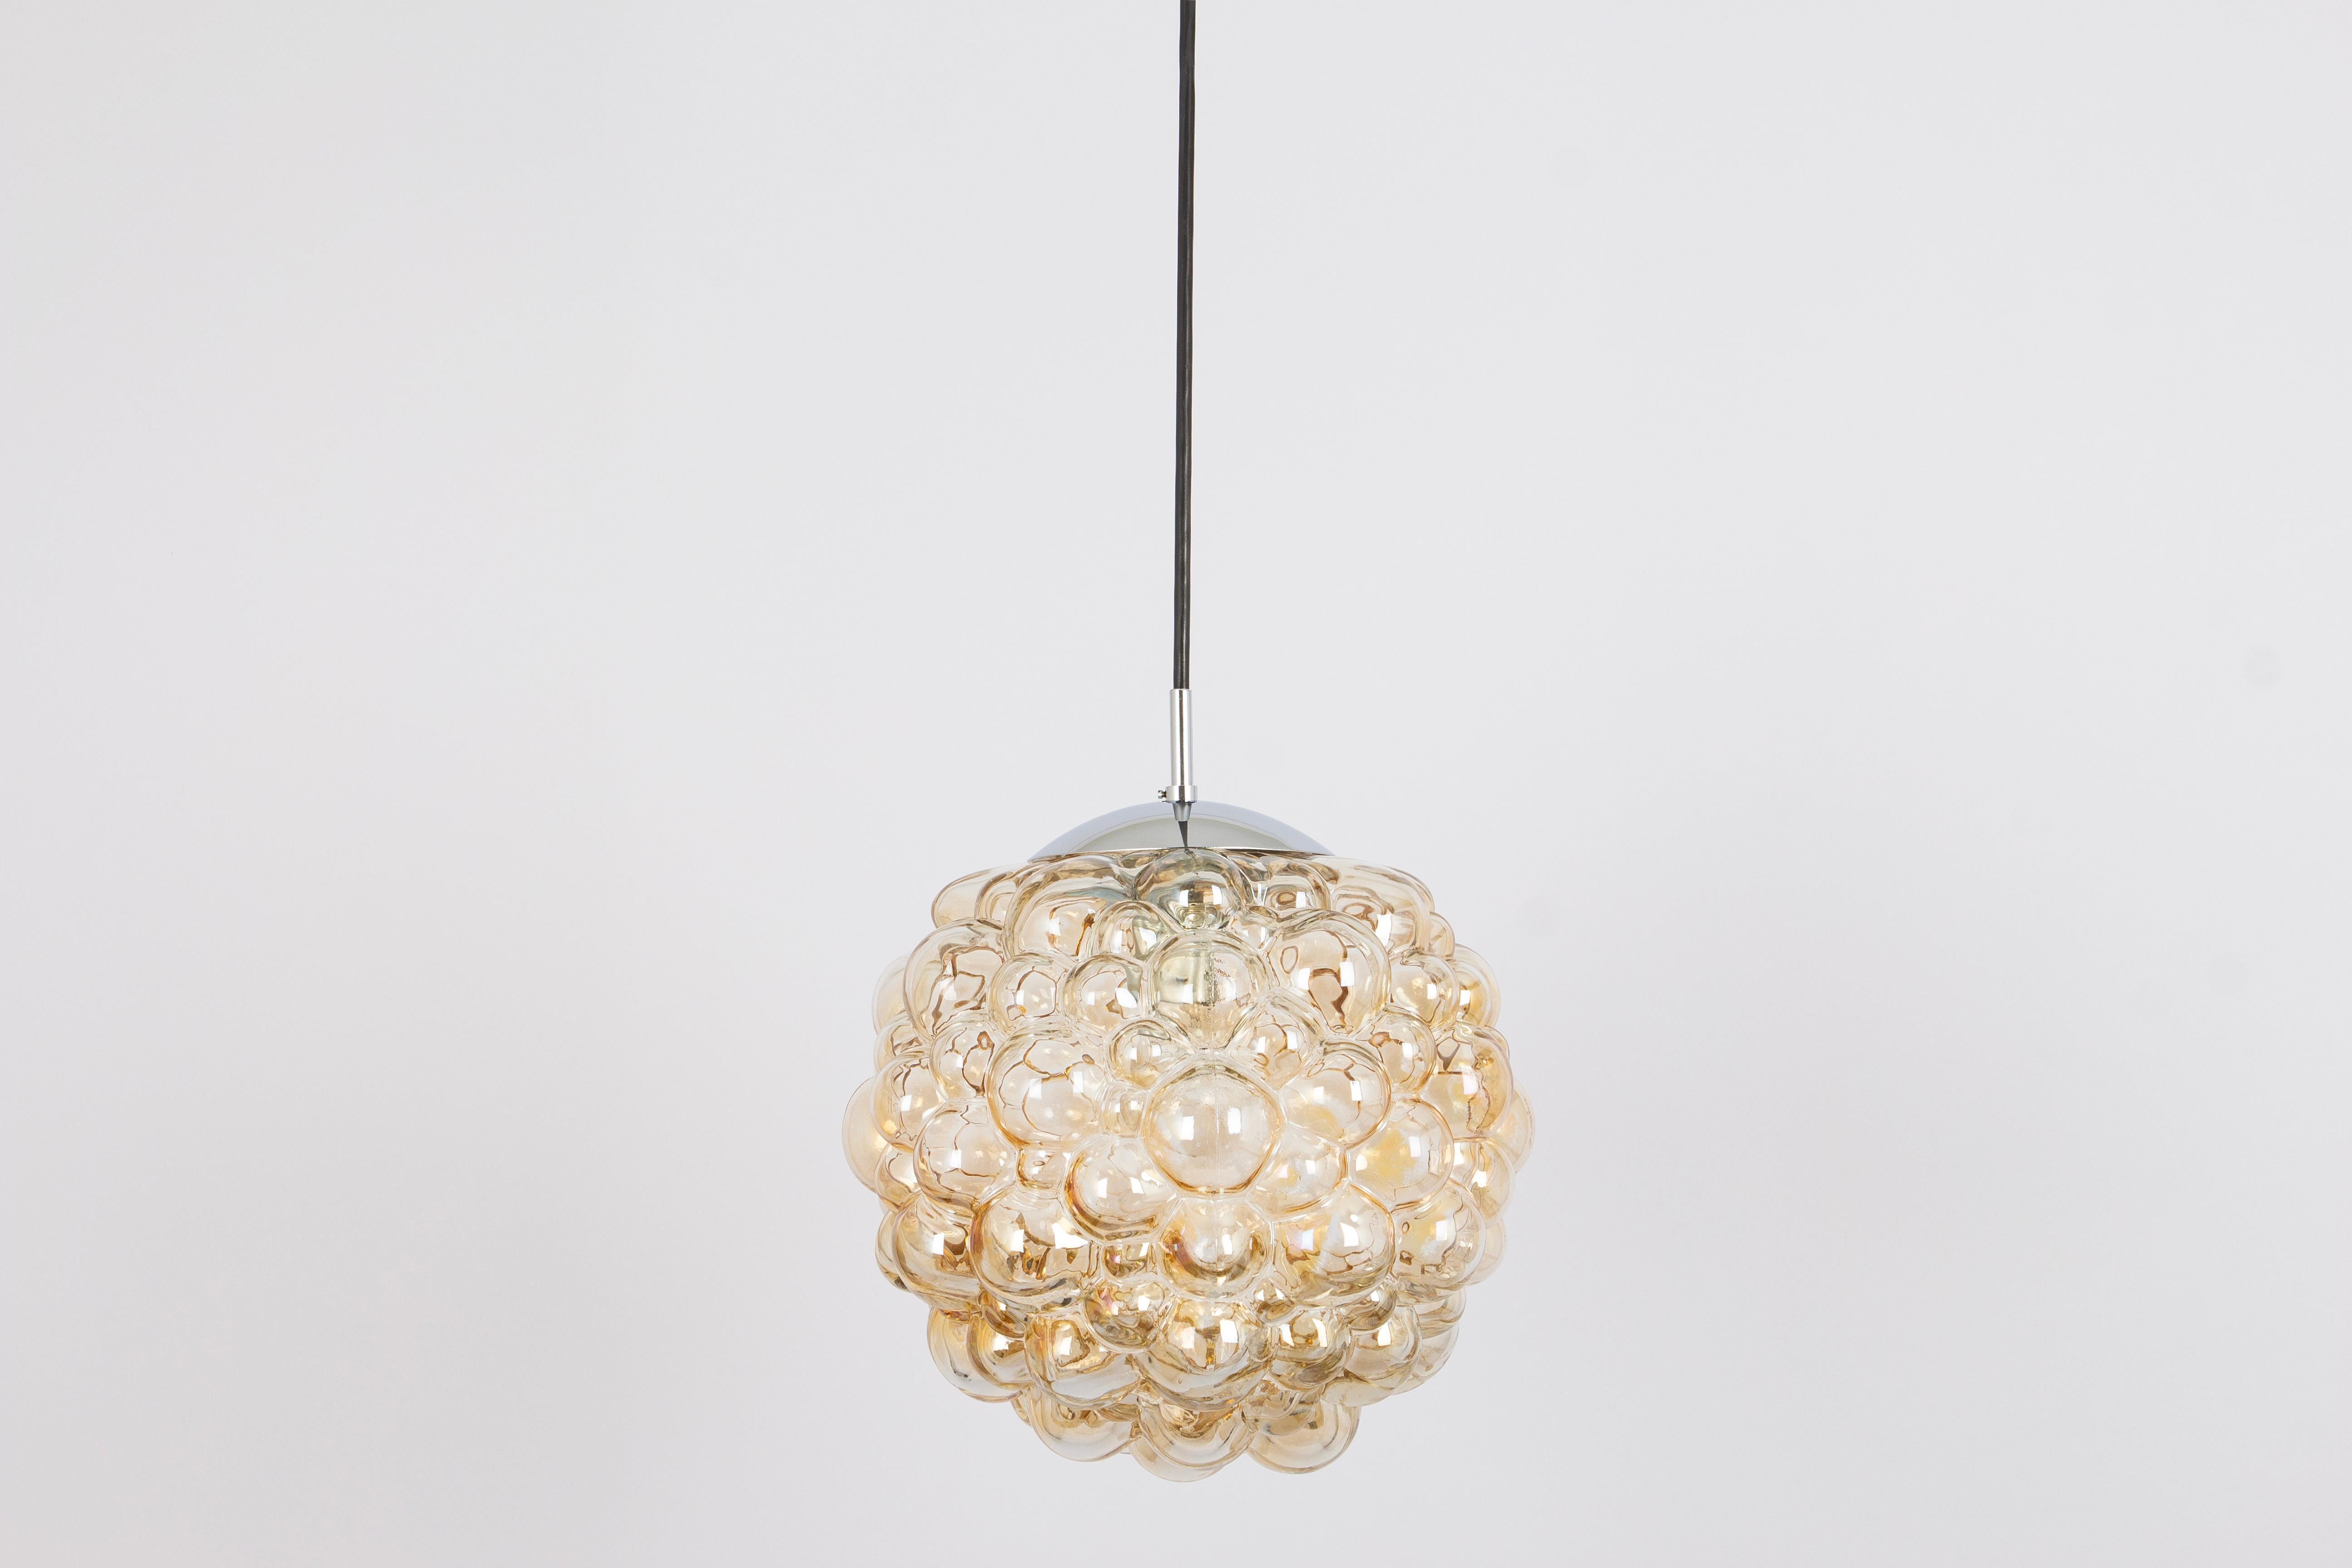 A round bubble glass pendant with light smoke tone designed by Helena Tynell for Limburg, manufactured in Germany, circa the 1970s
What sets this pendant light apart is its captivating bubble texture within the glass. Tiny bubbles are intentionally